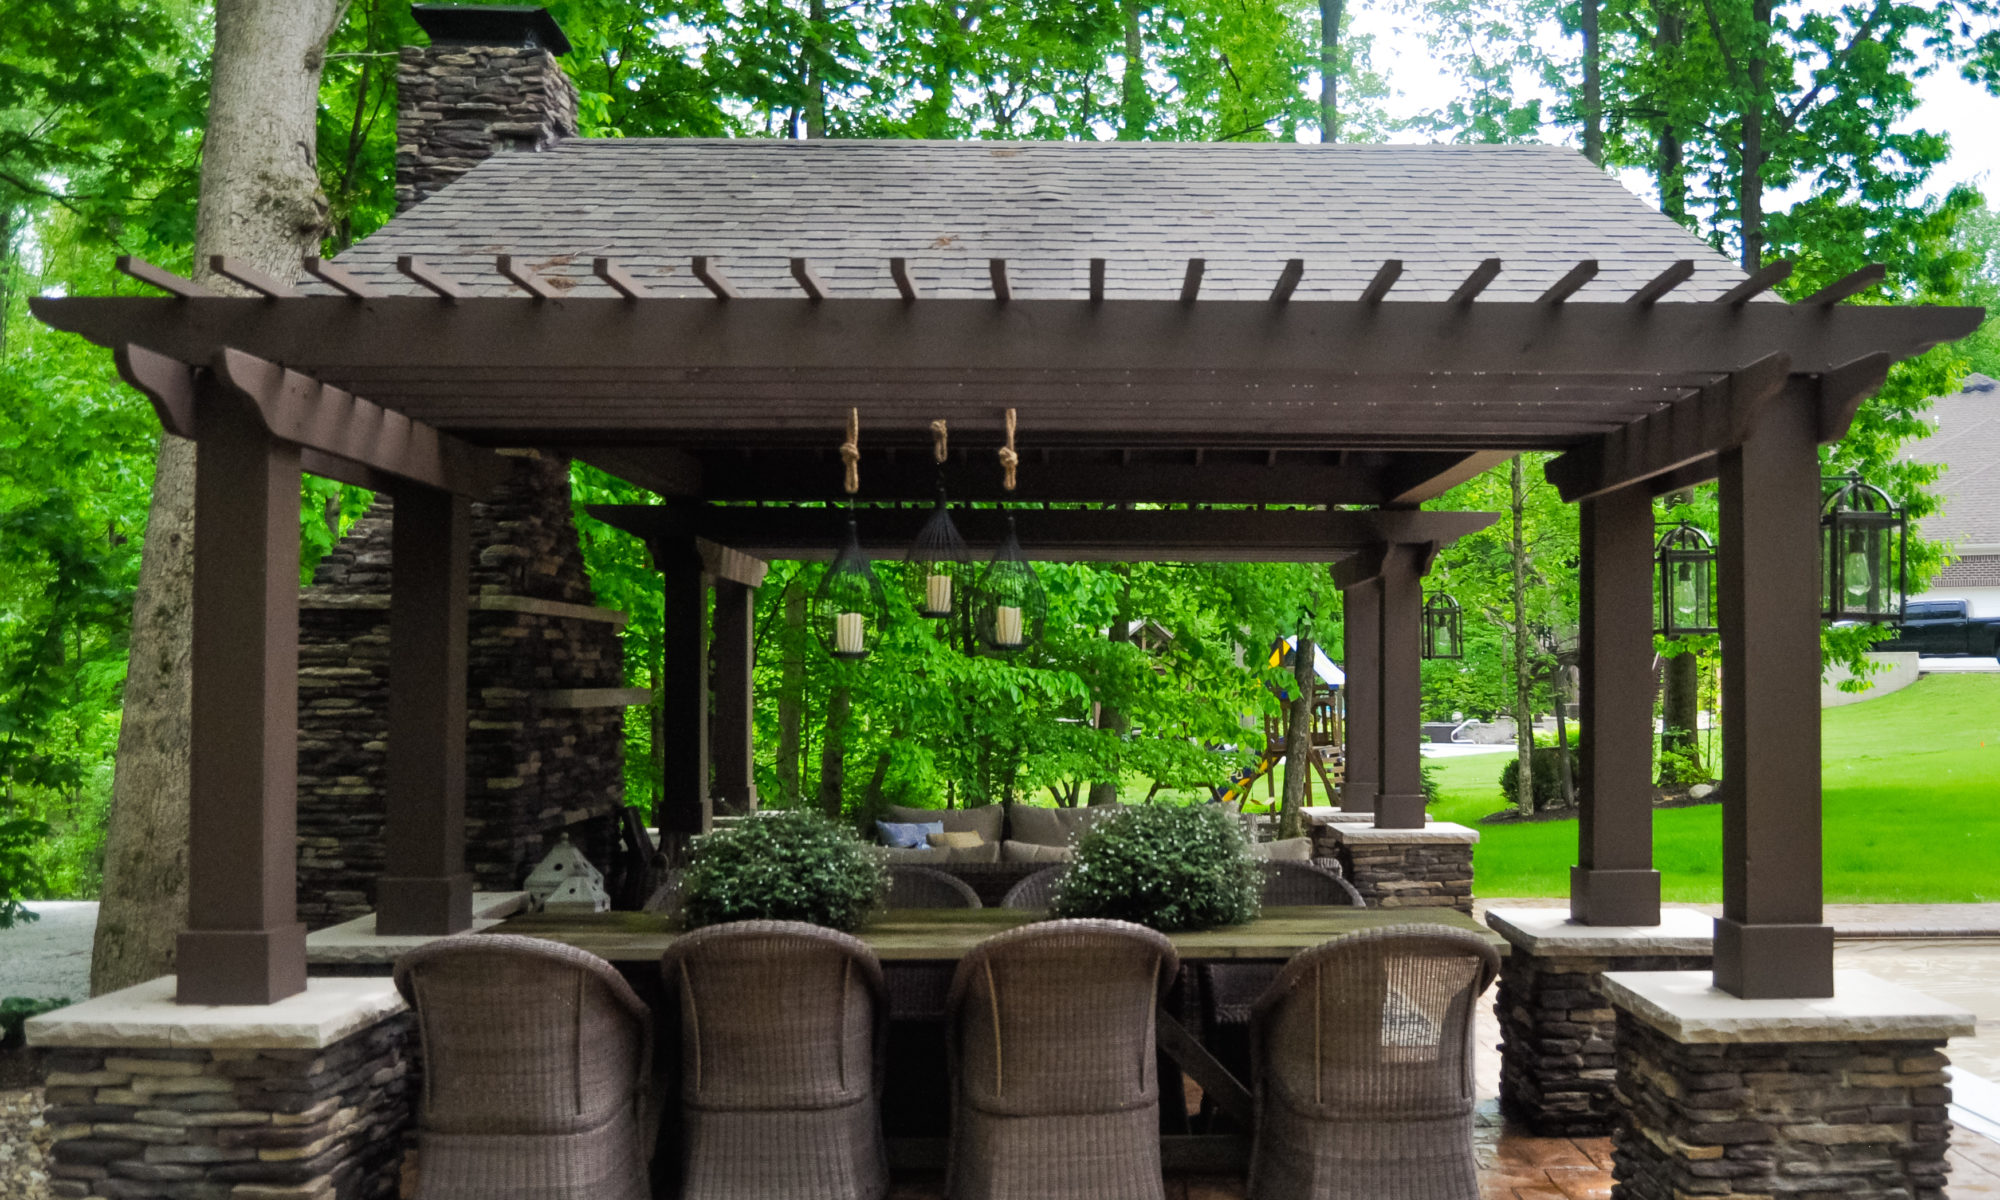 Precision Outdoors Avon patio & structure specialty built a-frame textured fireplace chimney pergola inspired structure decor additional seating raised sundeck tanning relaxation stamped concrete patio wrap around seating wall aesthetic style stone steps outdoor elements Avon indiana dream backyard pool